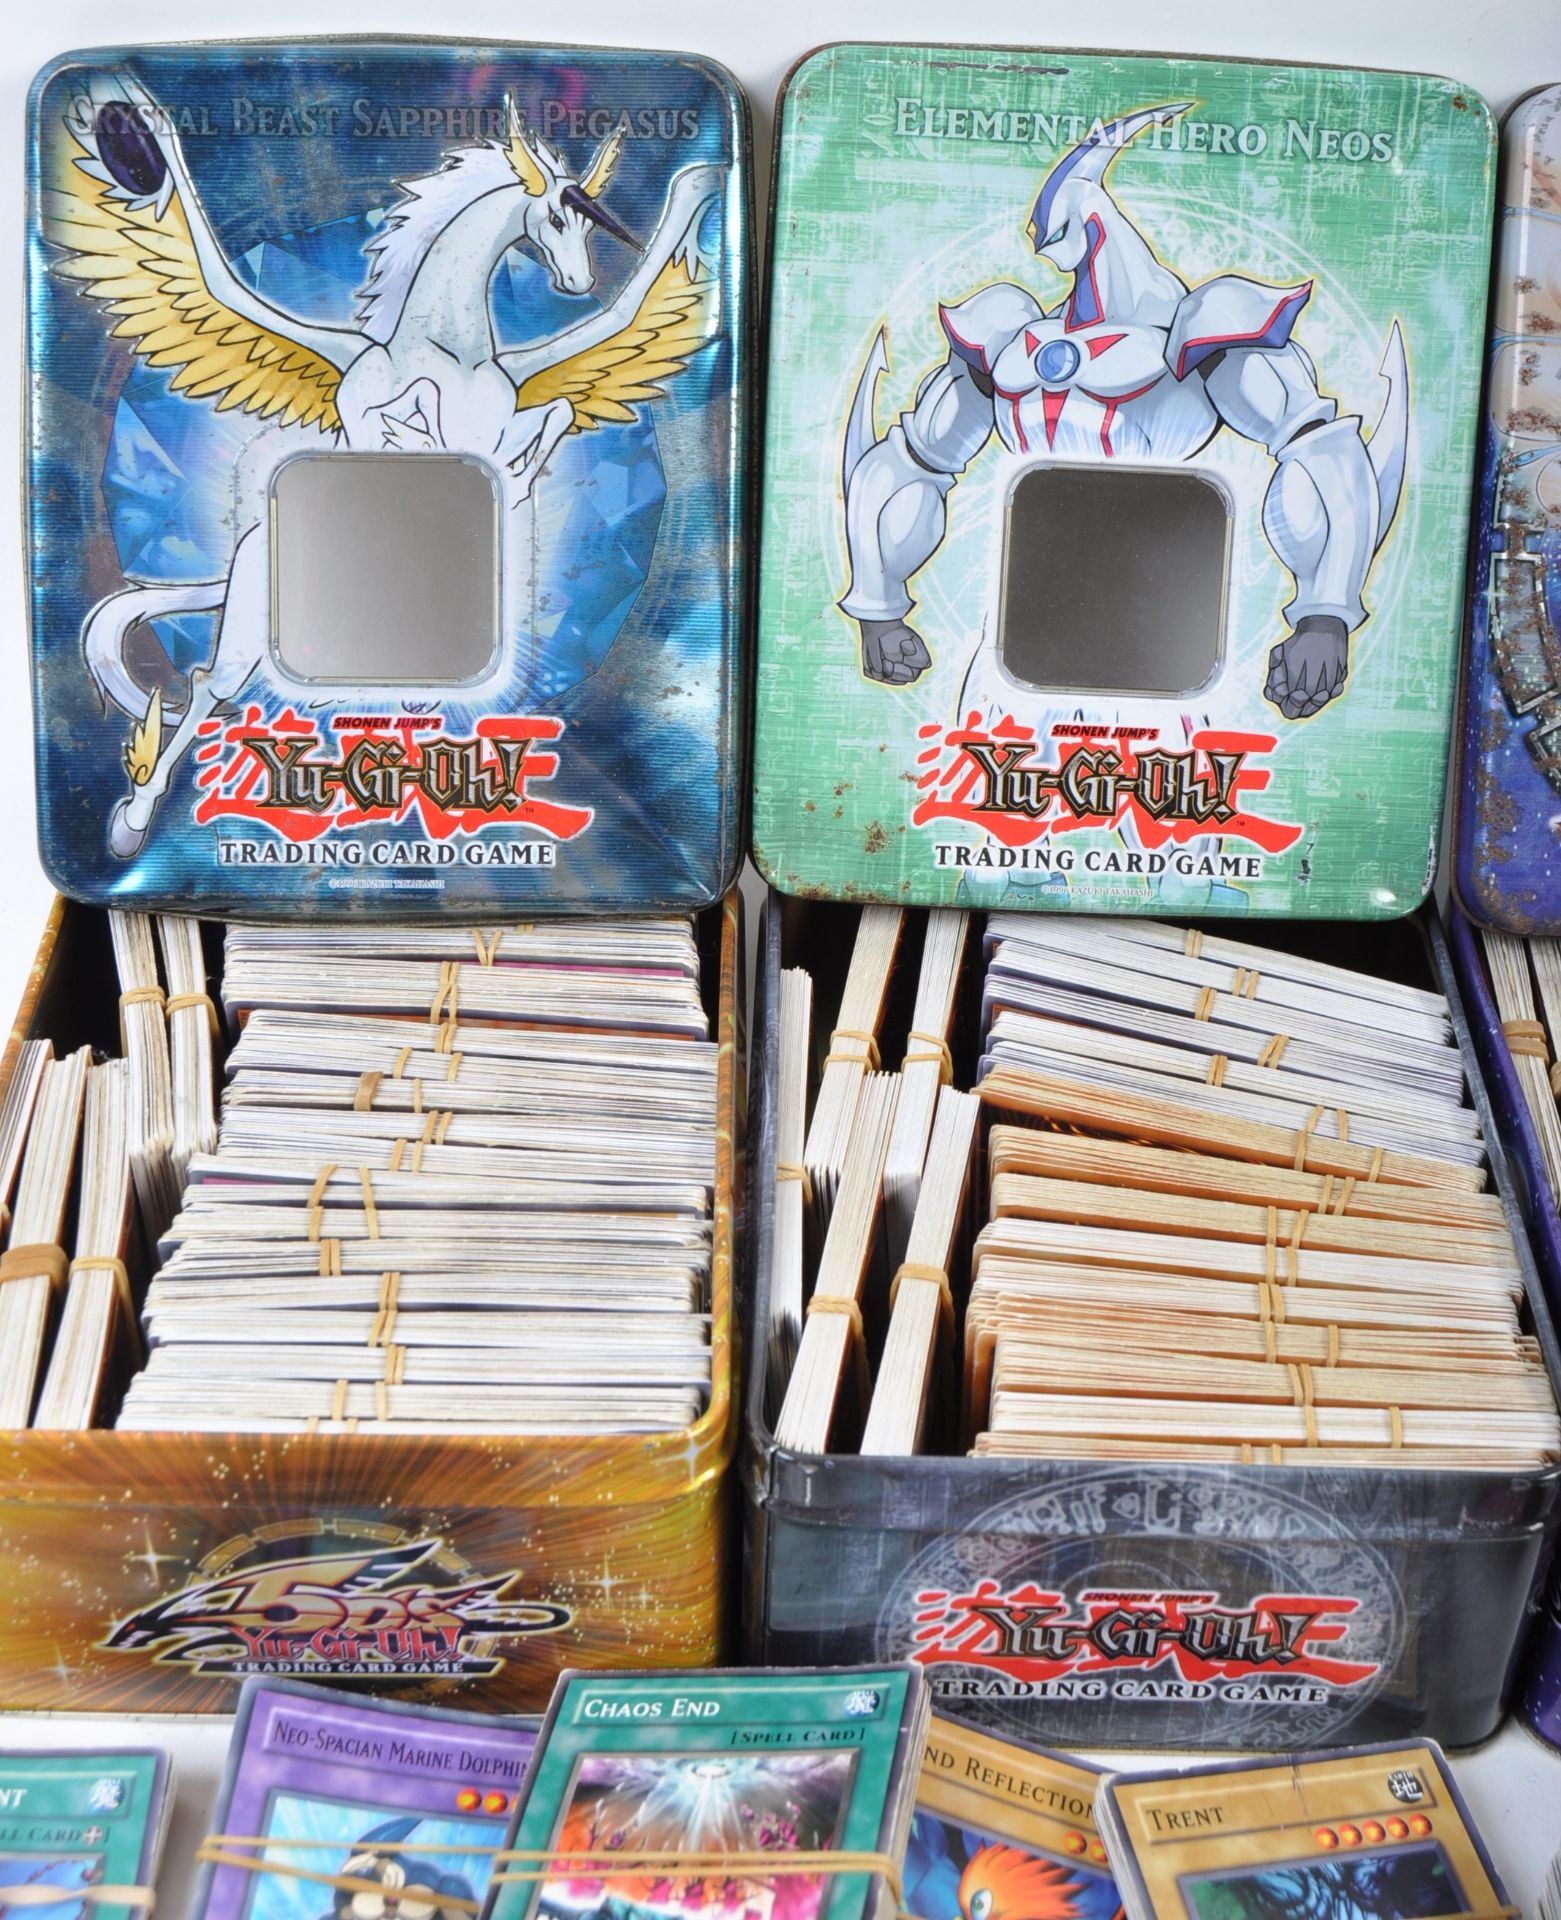 LARGE AND IMPRESSIVE COLLECTION OF YUGIOH TRADING CARDS - Image 5 of 5